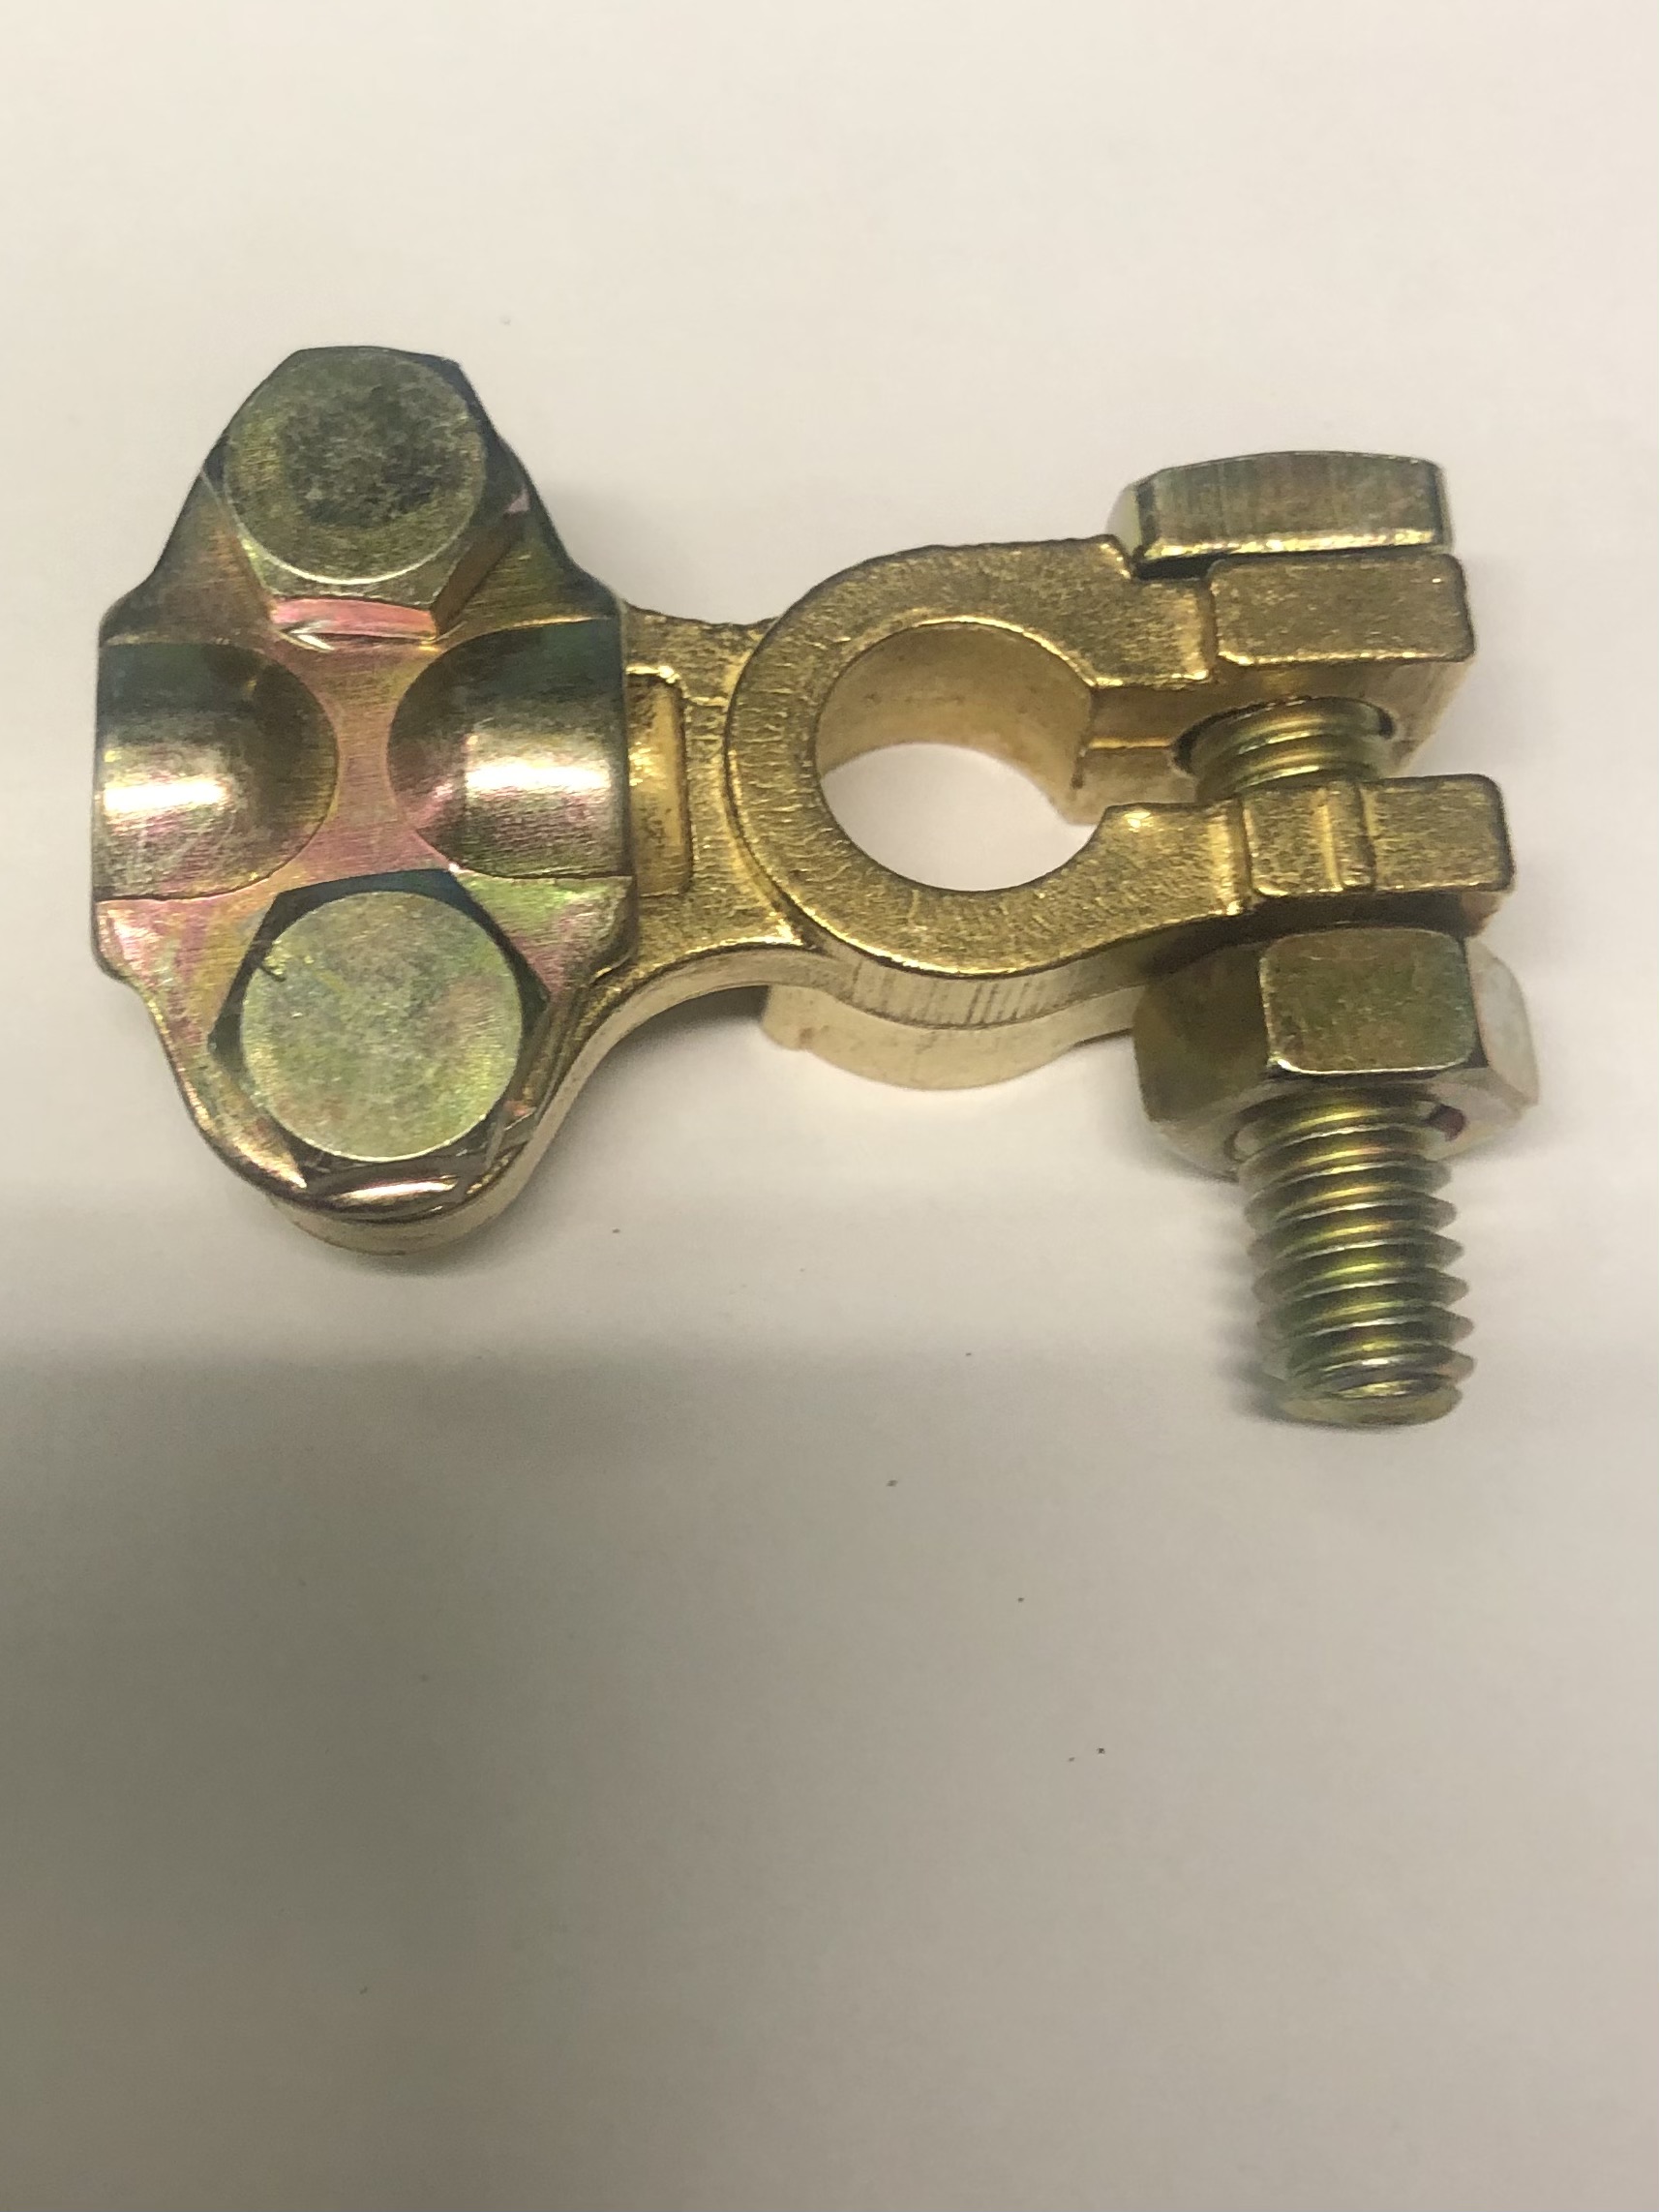 BT36-P small post terminal saddle brass positive - 1 only